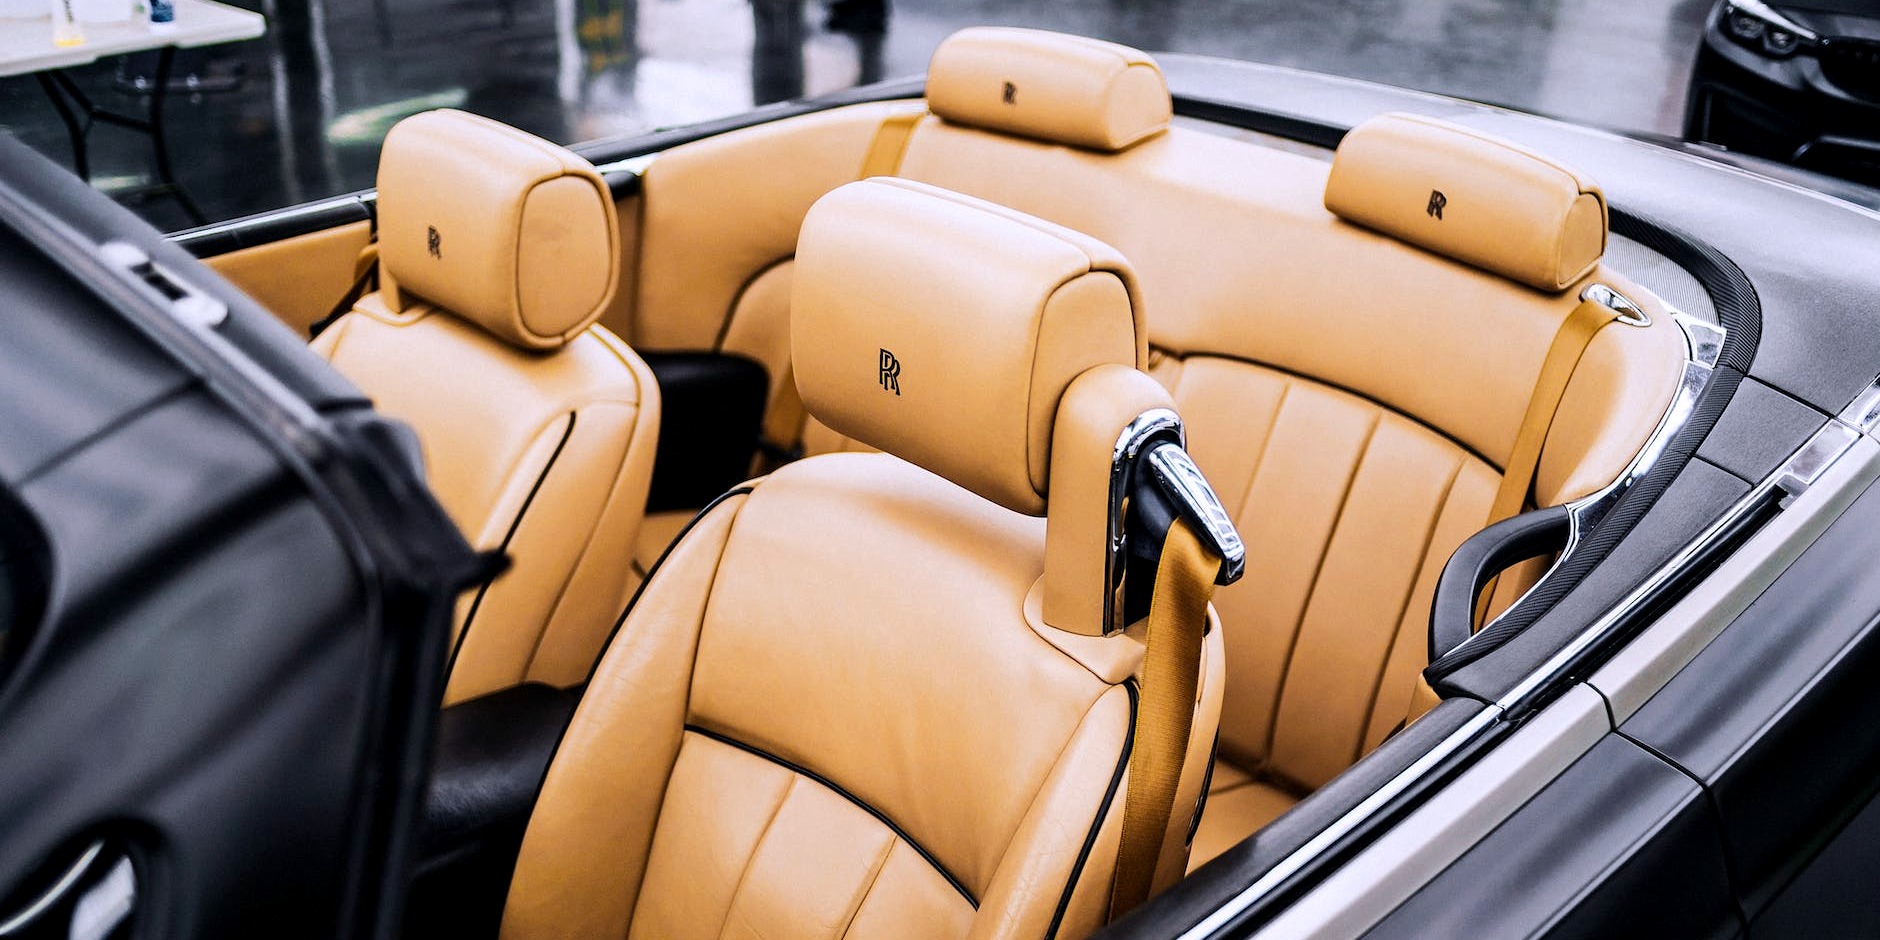 Discover the Top Features That Make the Rolls Royce Phantom Stand Out in Basildon's Luxury Car Scene